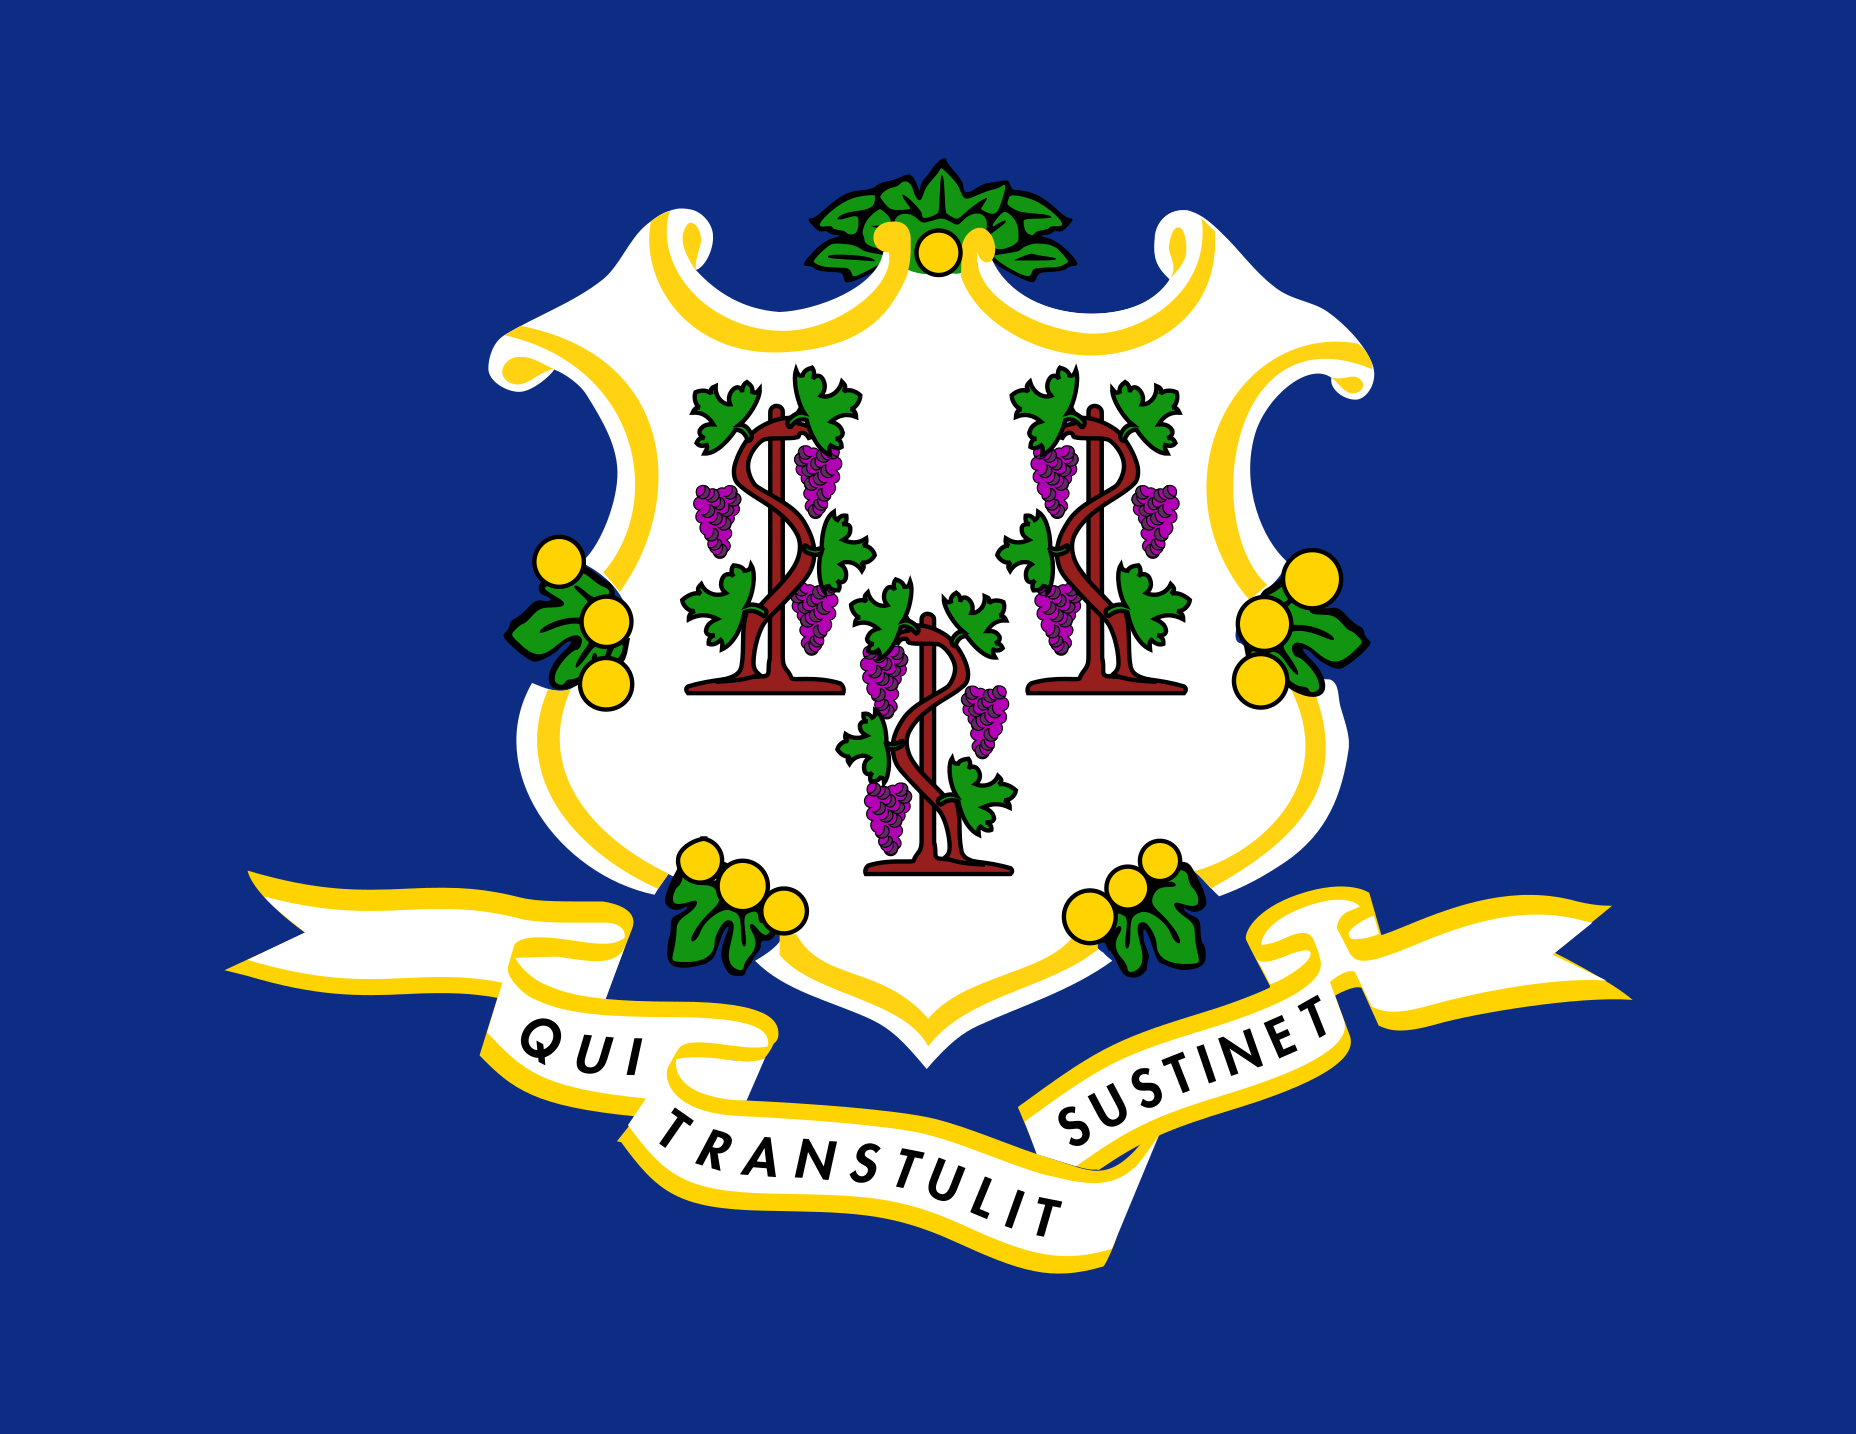 Free Connecticut Flag Images: AI, EPS, GIF, JPG, PDF, PNG, SVG and more!